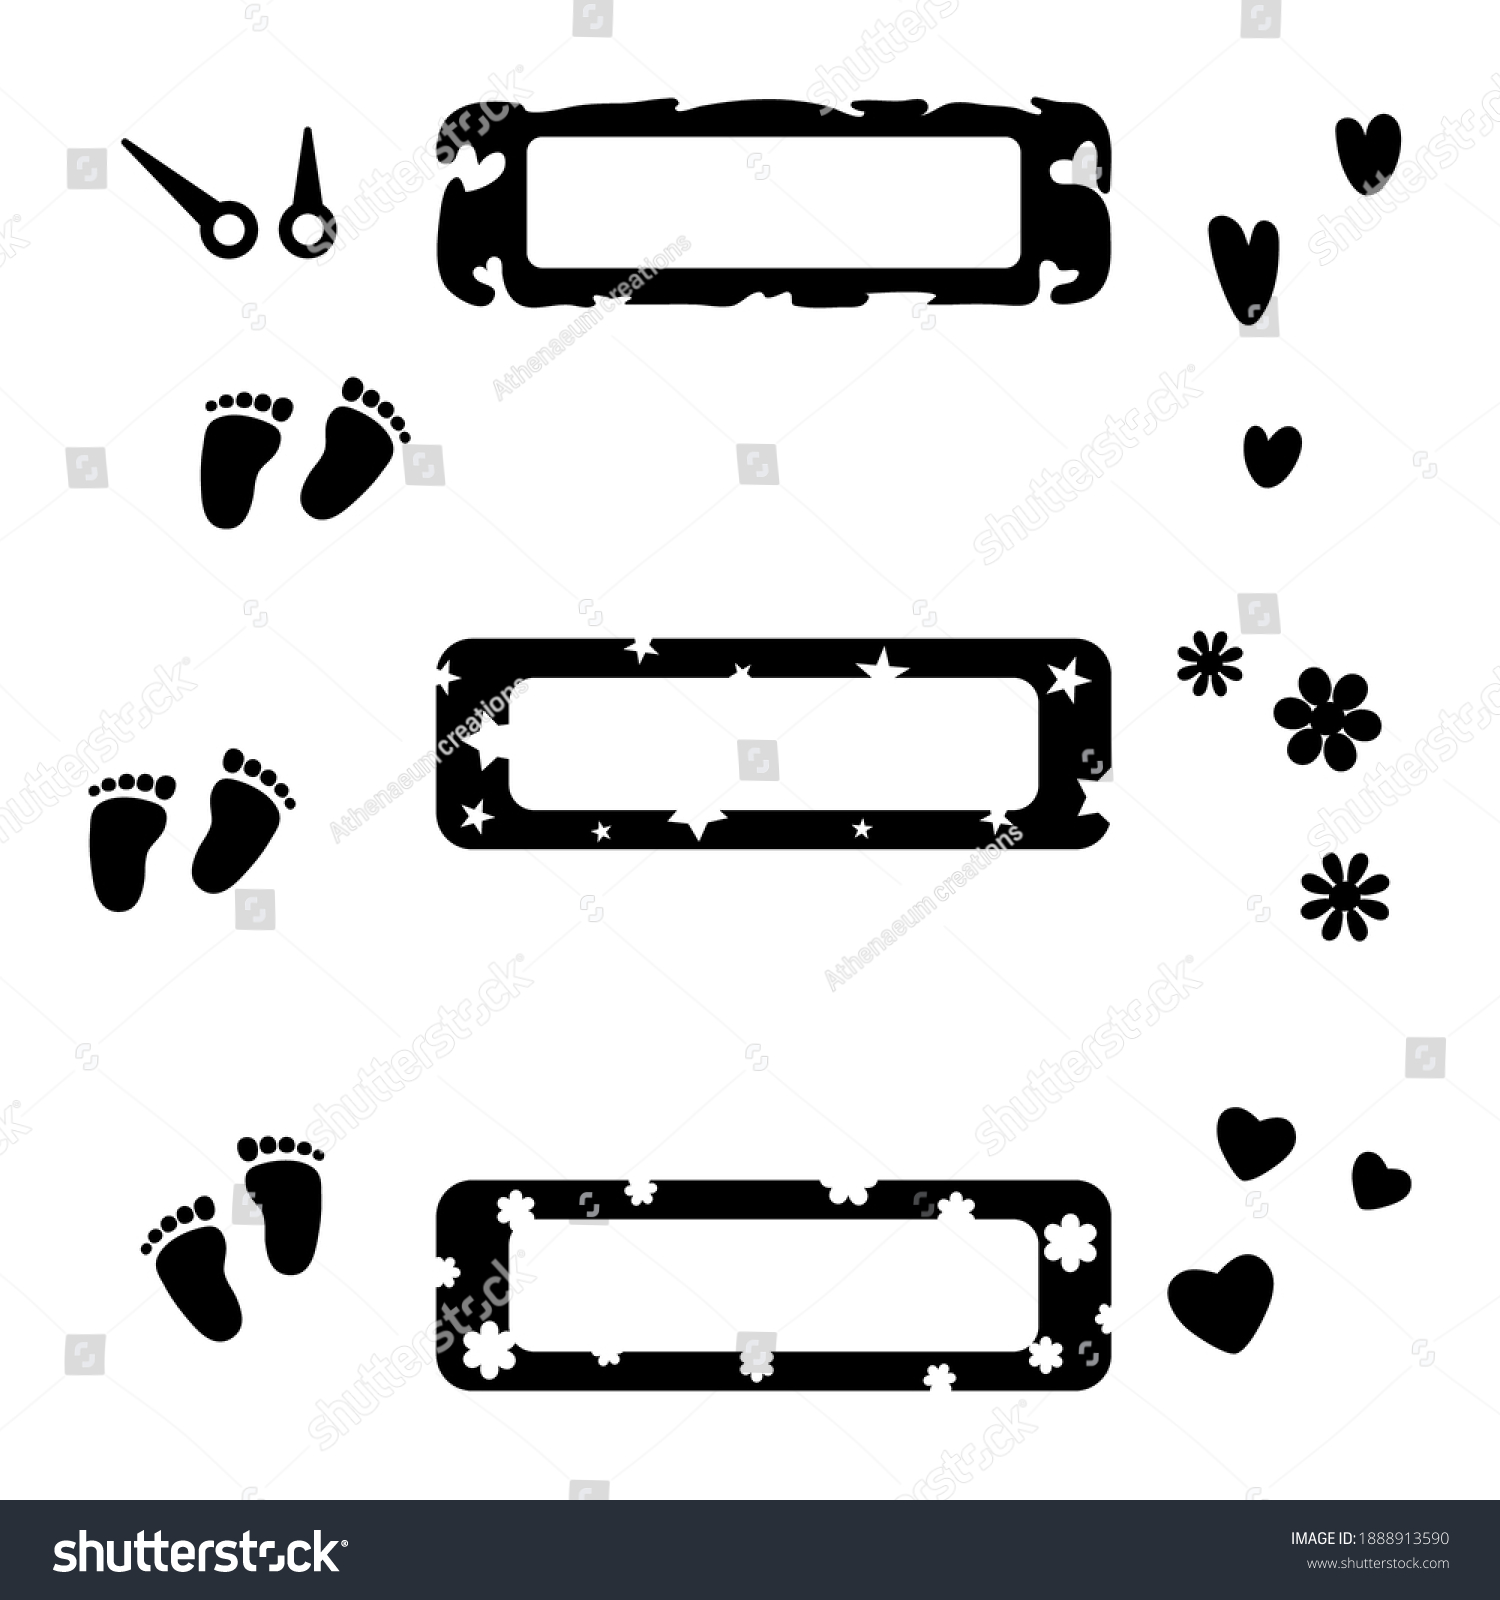 SVG of Baby footprints, hearts, flowers, frames set. Birth Stats decorative elements for Birth Announcement design. Vector illustration for scrapbooking, albums, metrics, posters, invitation cards for baby. svg